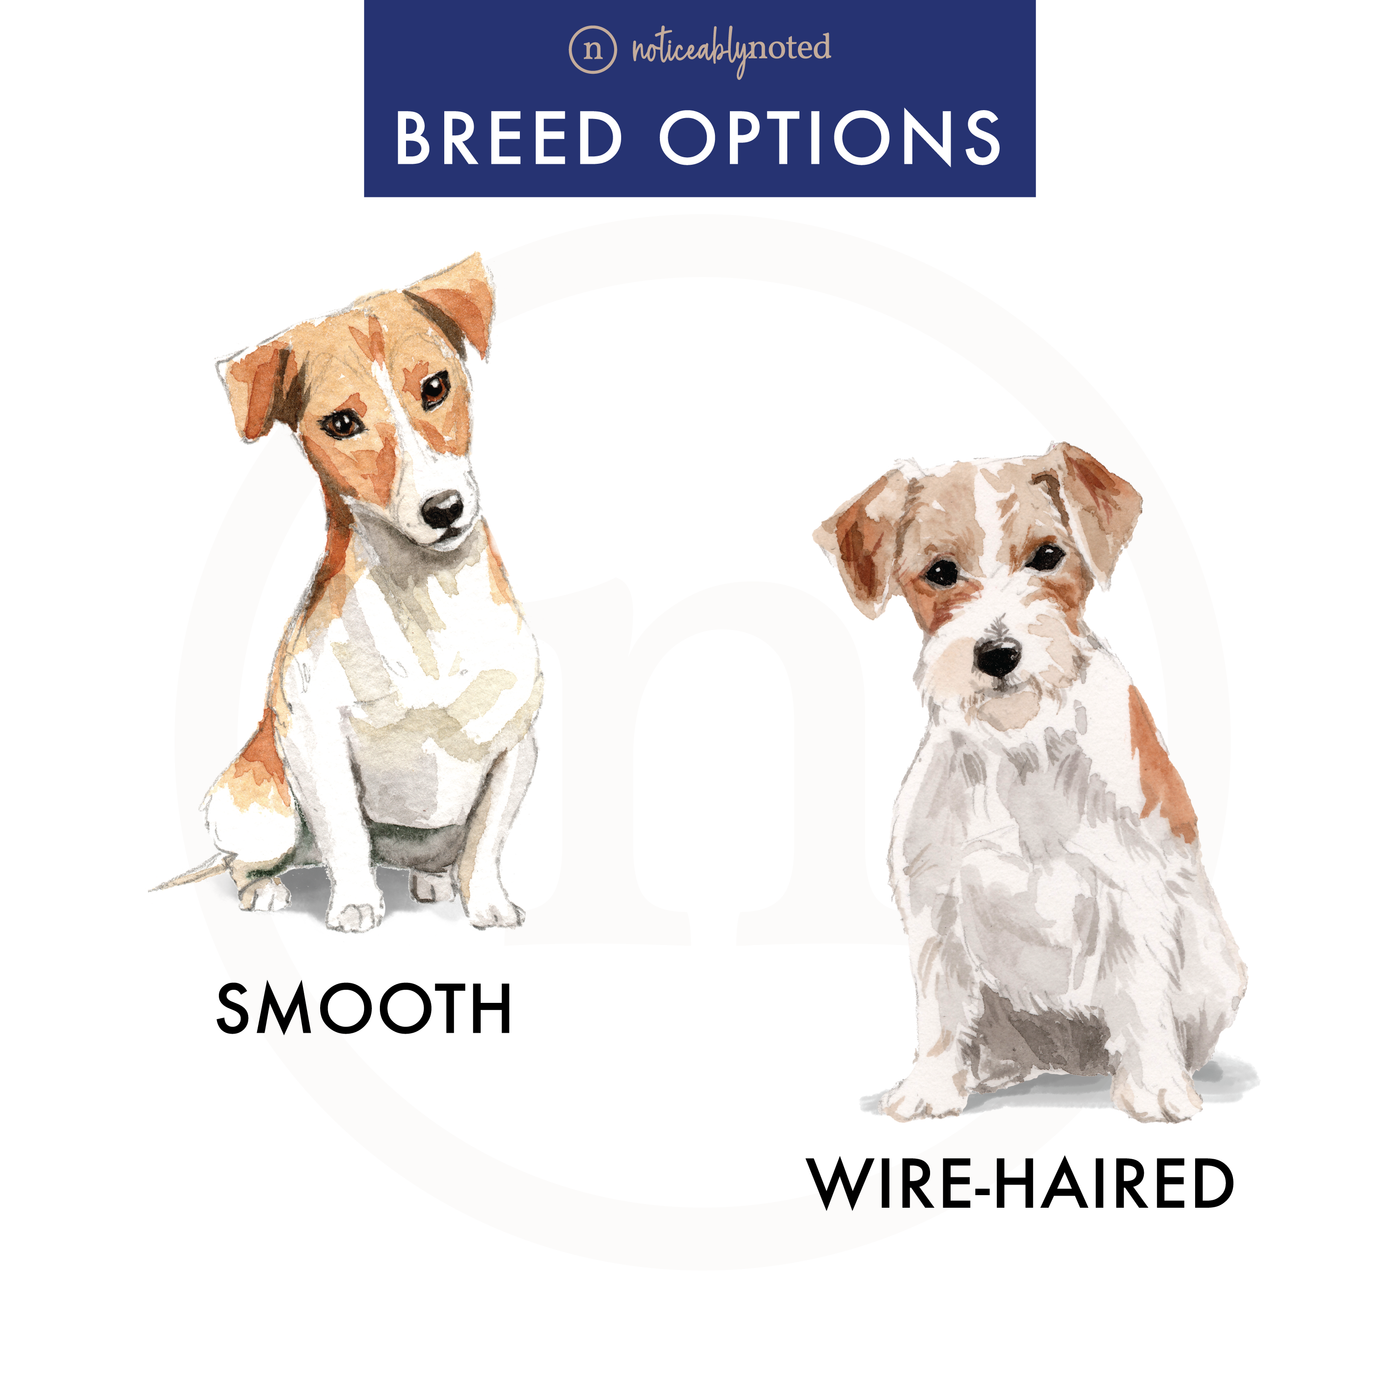 Jack Russell Dog Flat Cards